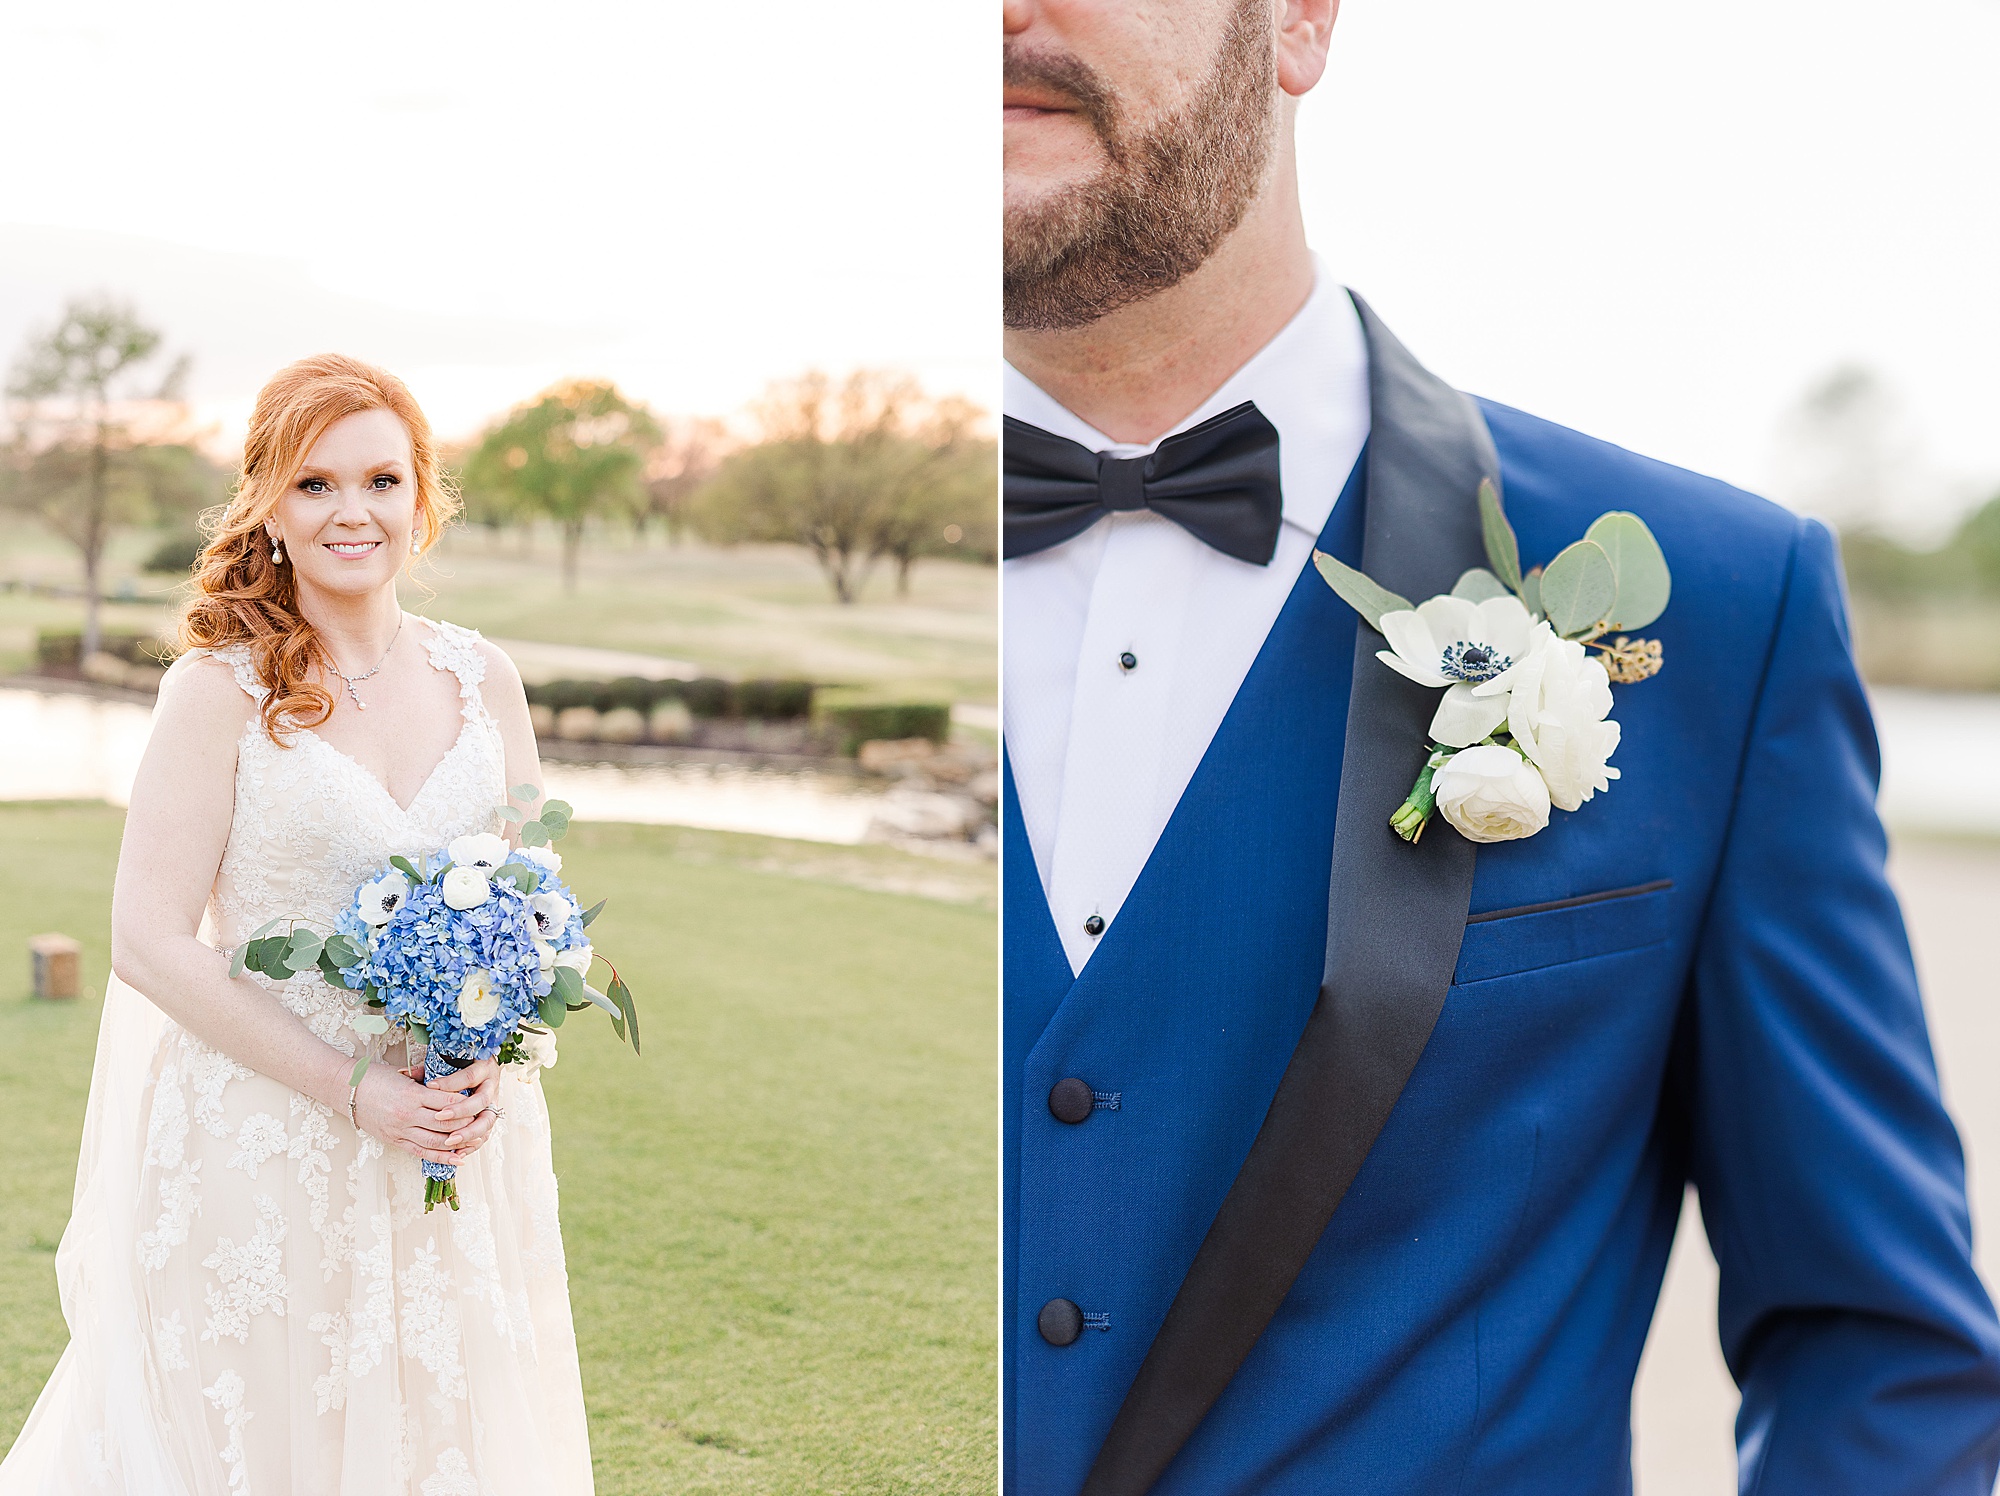 bride poses with bouquet of blue flowers and groom has boutonnière of white flowers